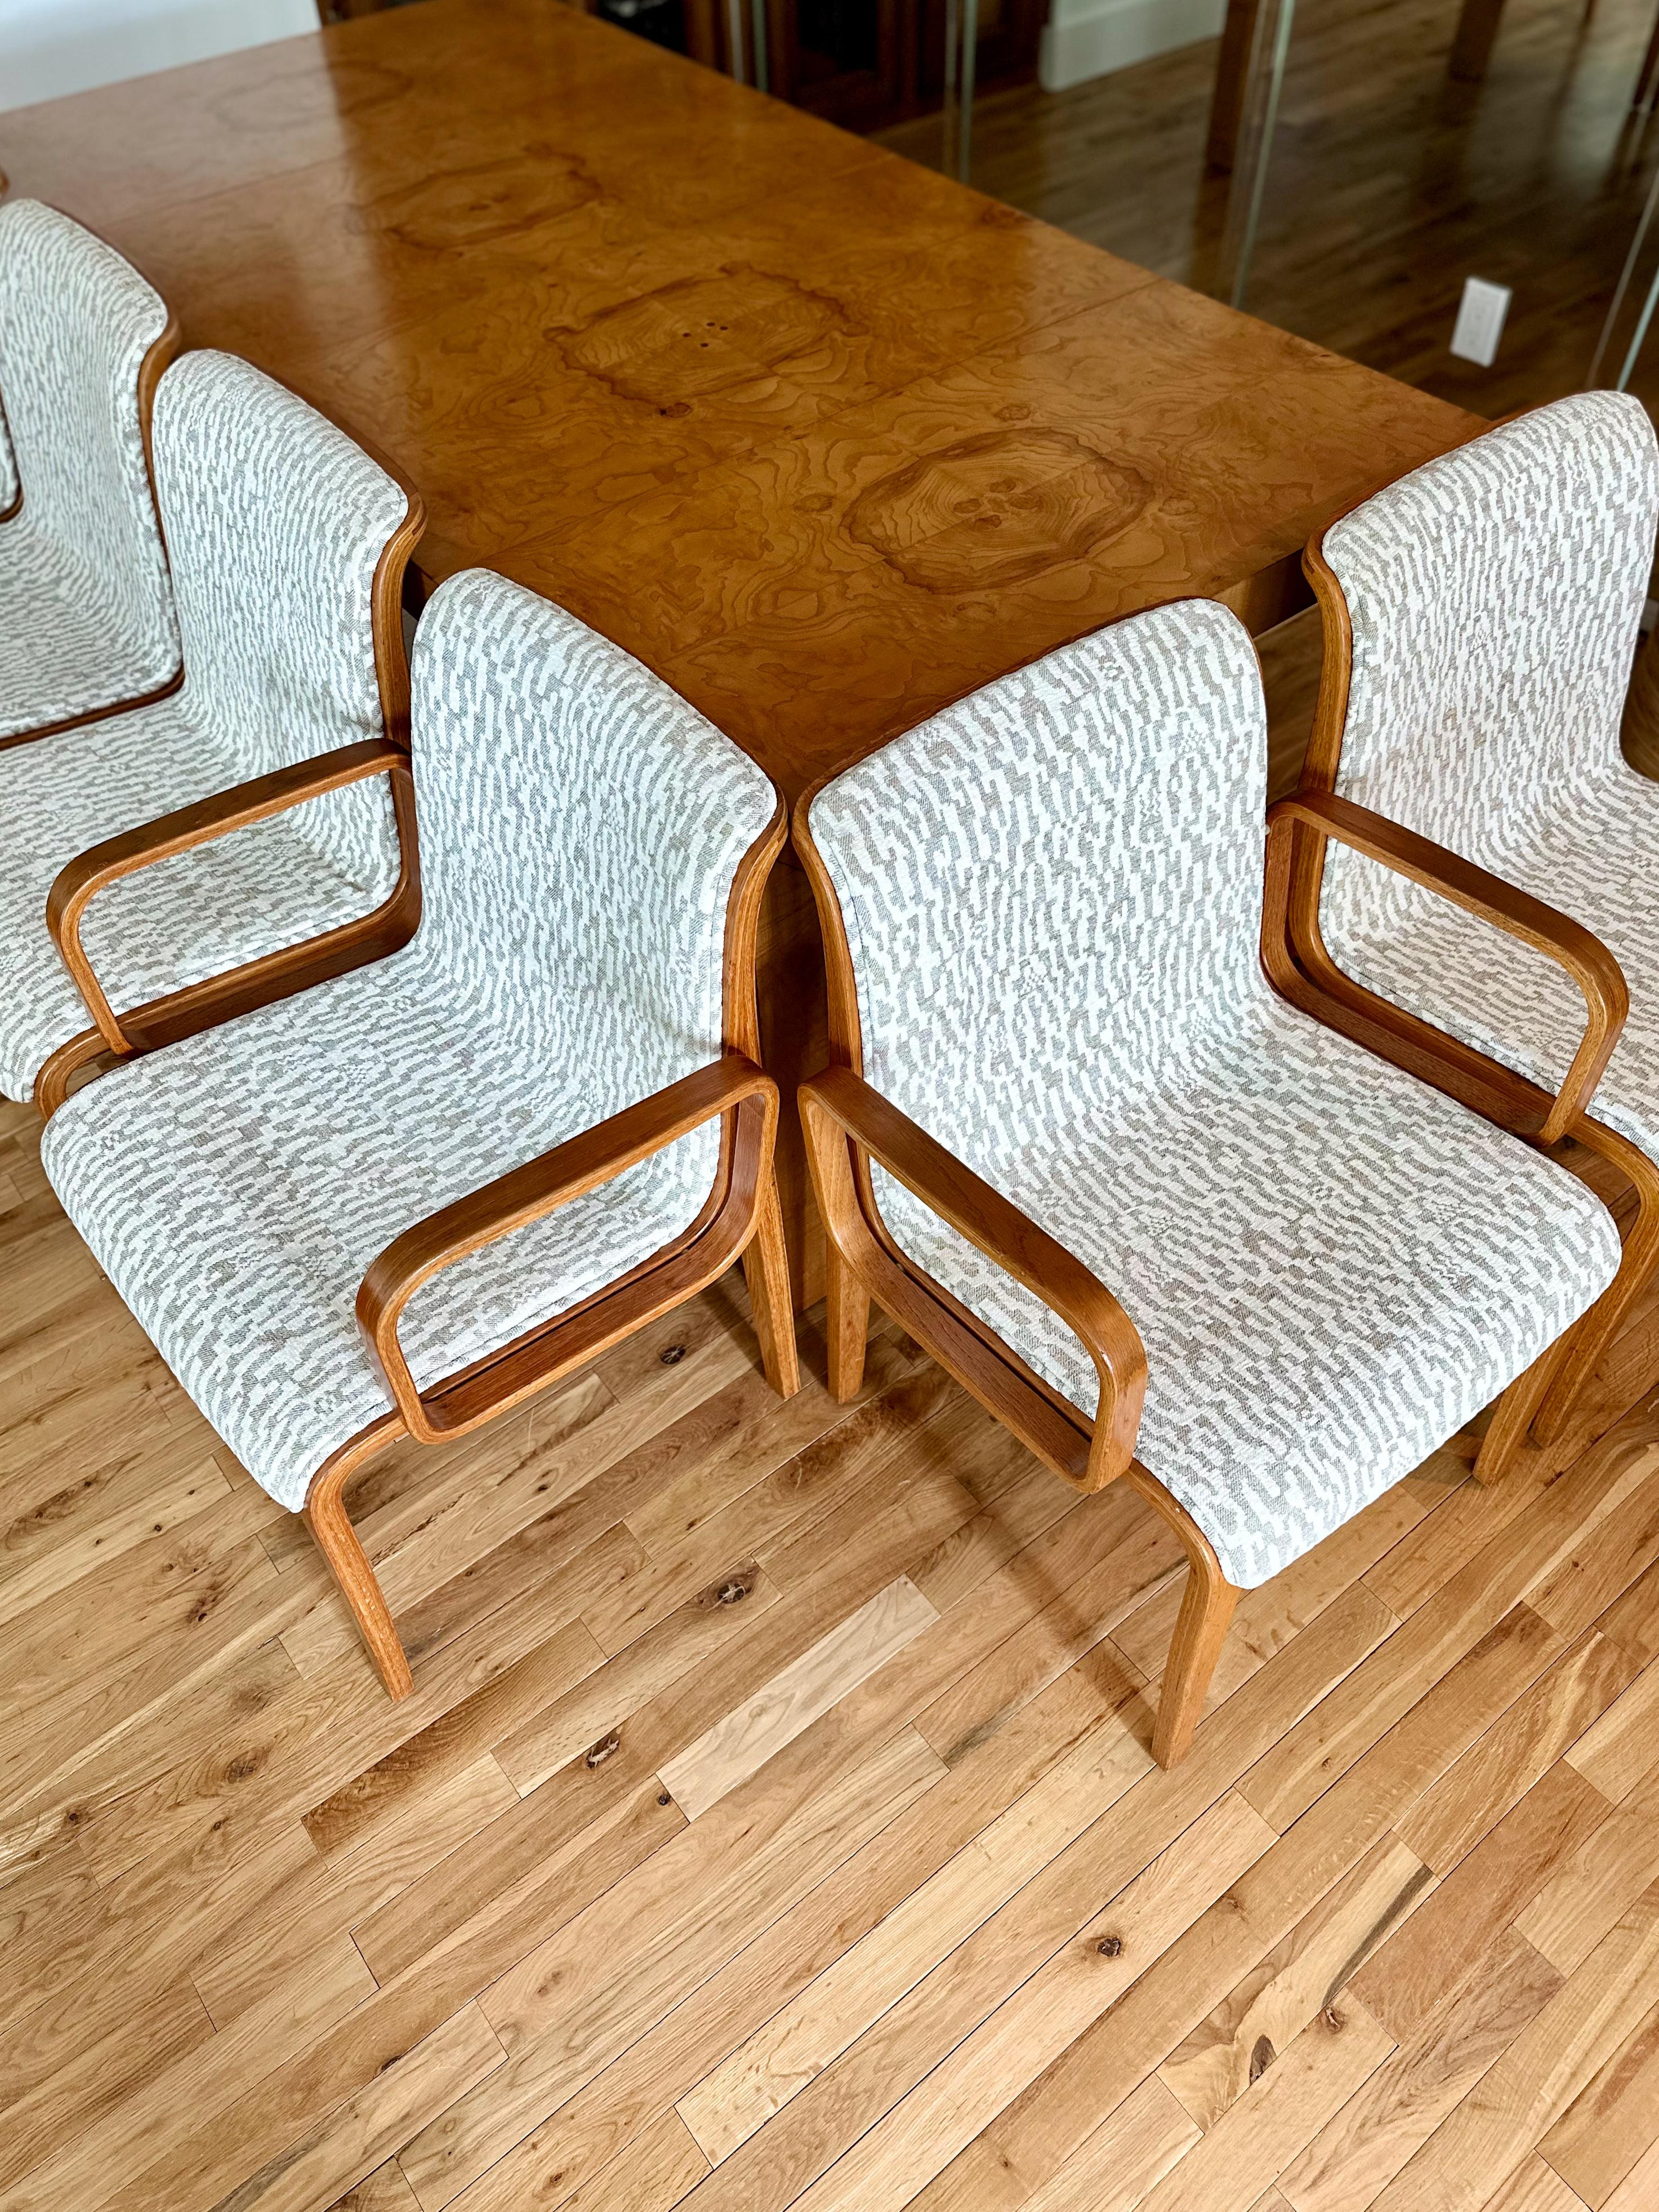 1976 Bill Stephens for Knoll Dining Chairs - Set of 6 2